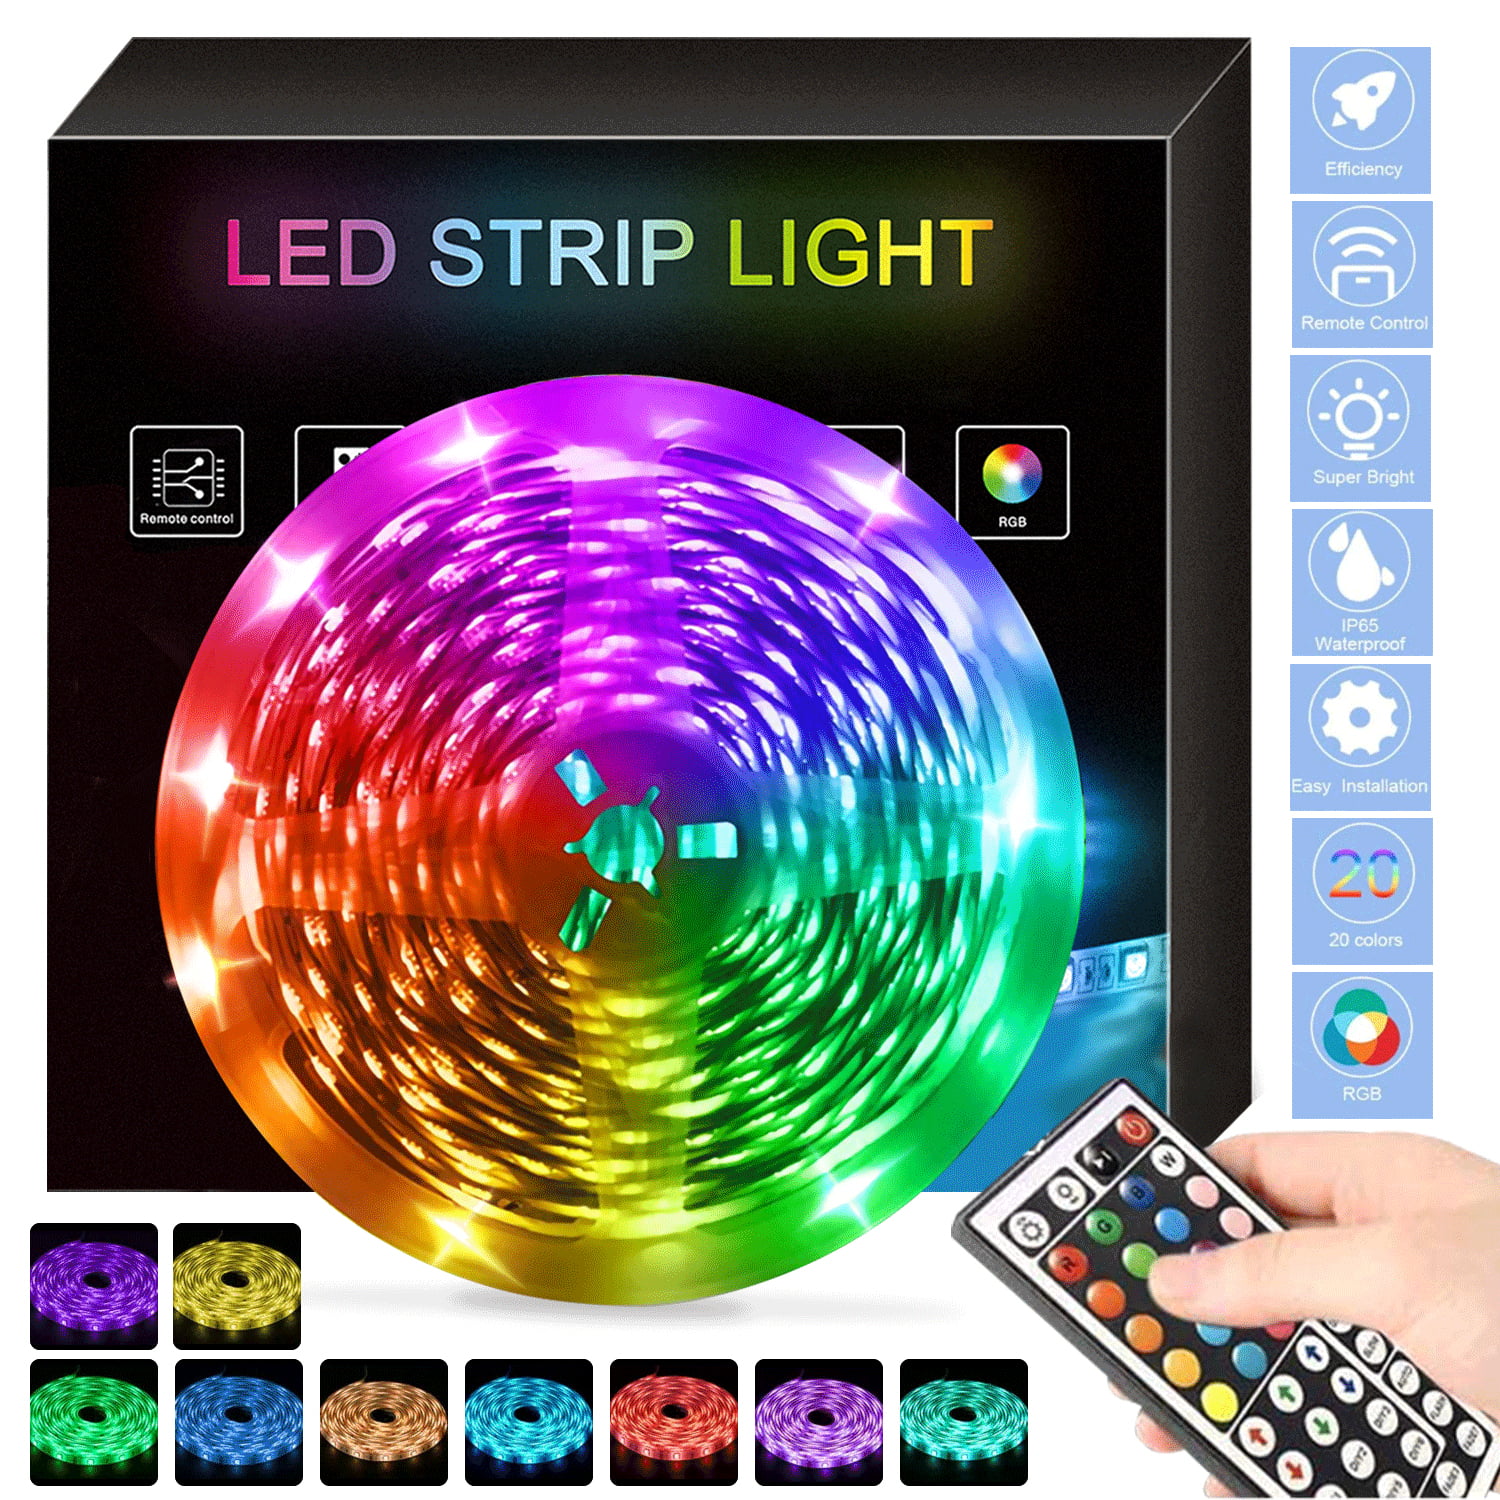 52” Lighted Product Retail Display Shelf remote control color changing lights 